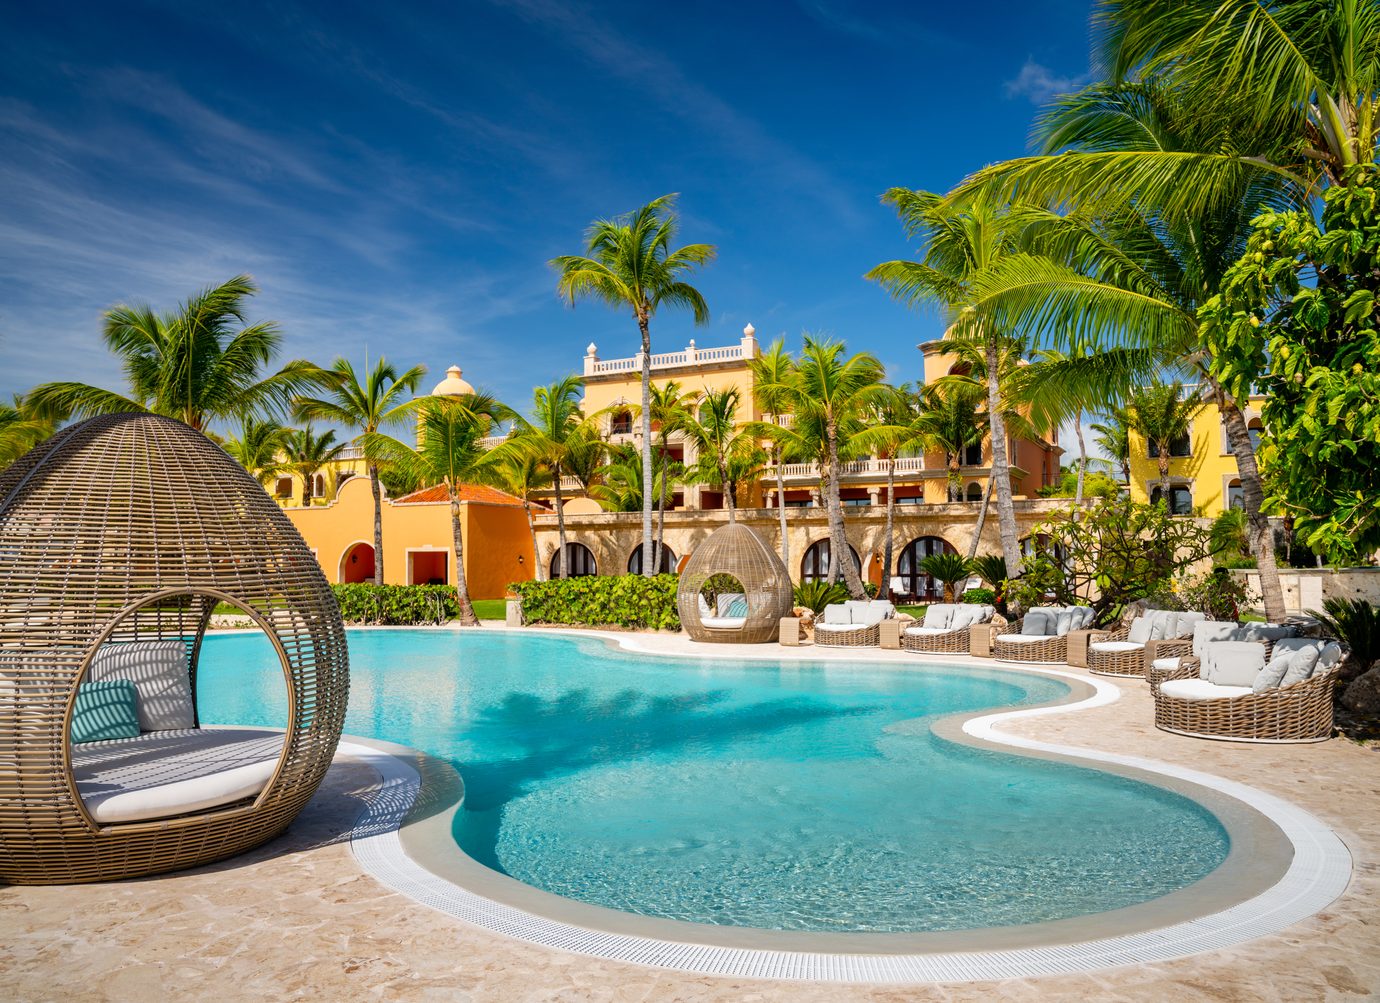 The 5 Best AdultsOnly AllInclusive Resorts in Punta Cana